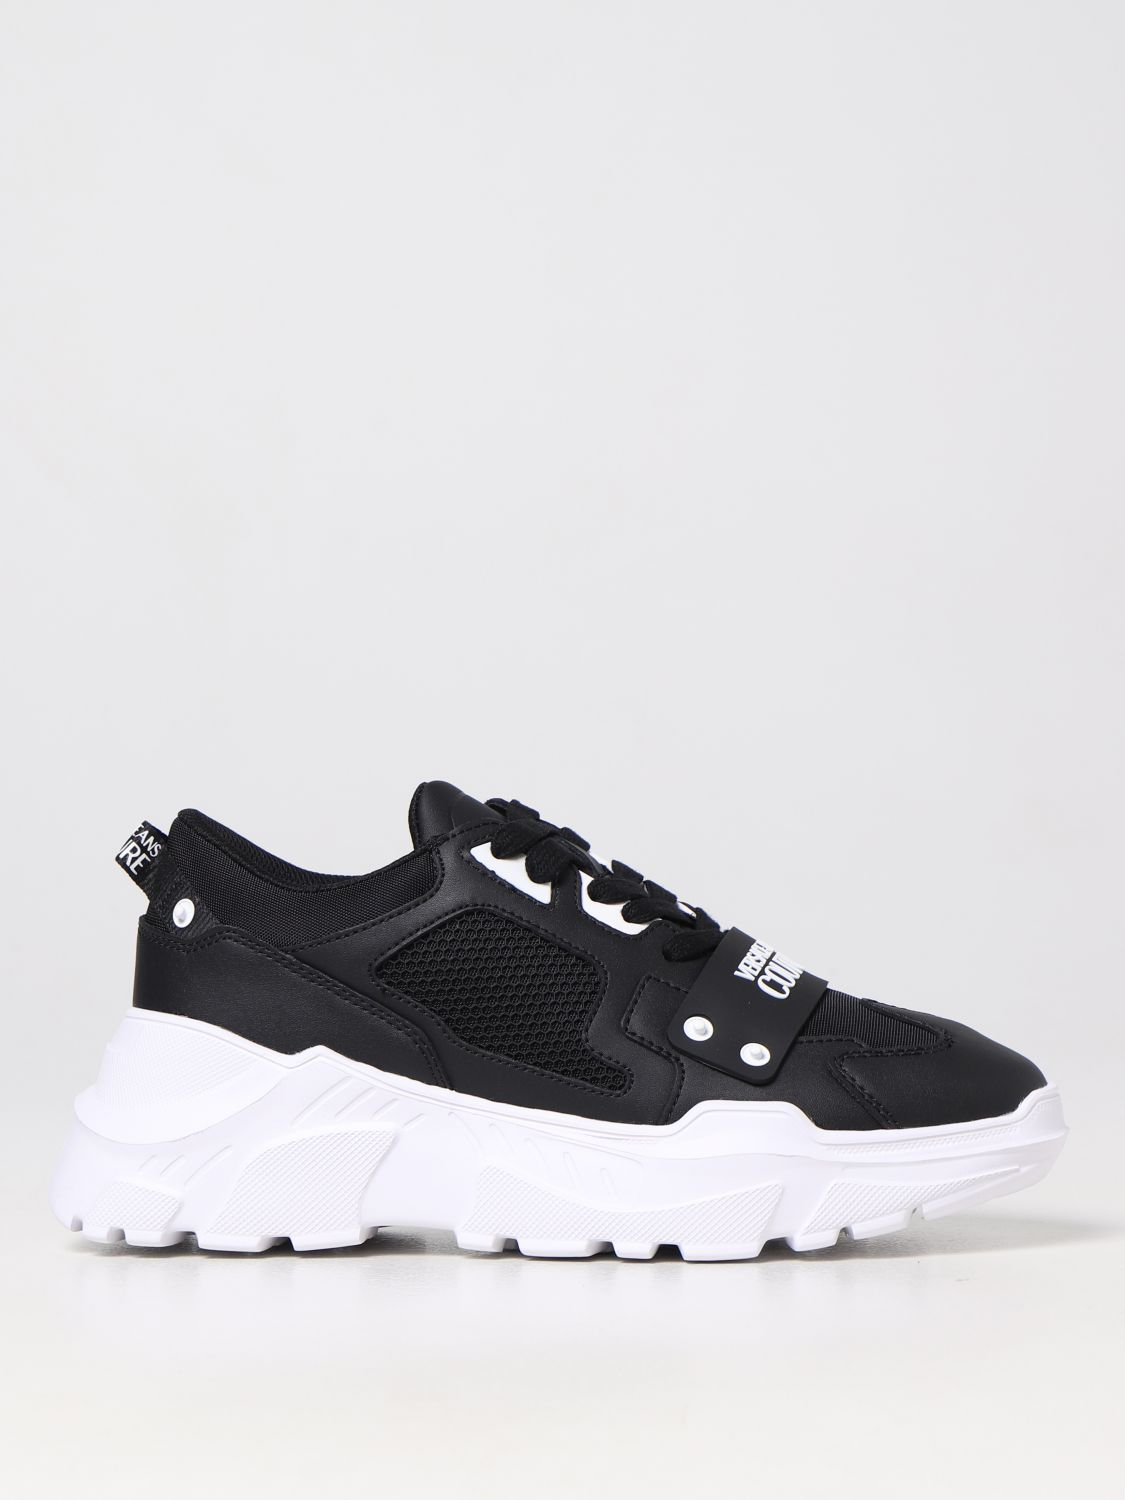 VERSACE JEANS COUTURE: sneakers for man - Black | Versace Jeans Couture ...